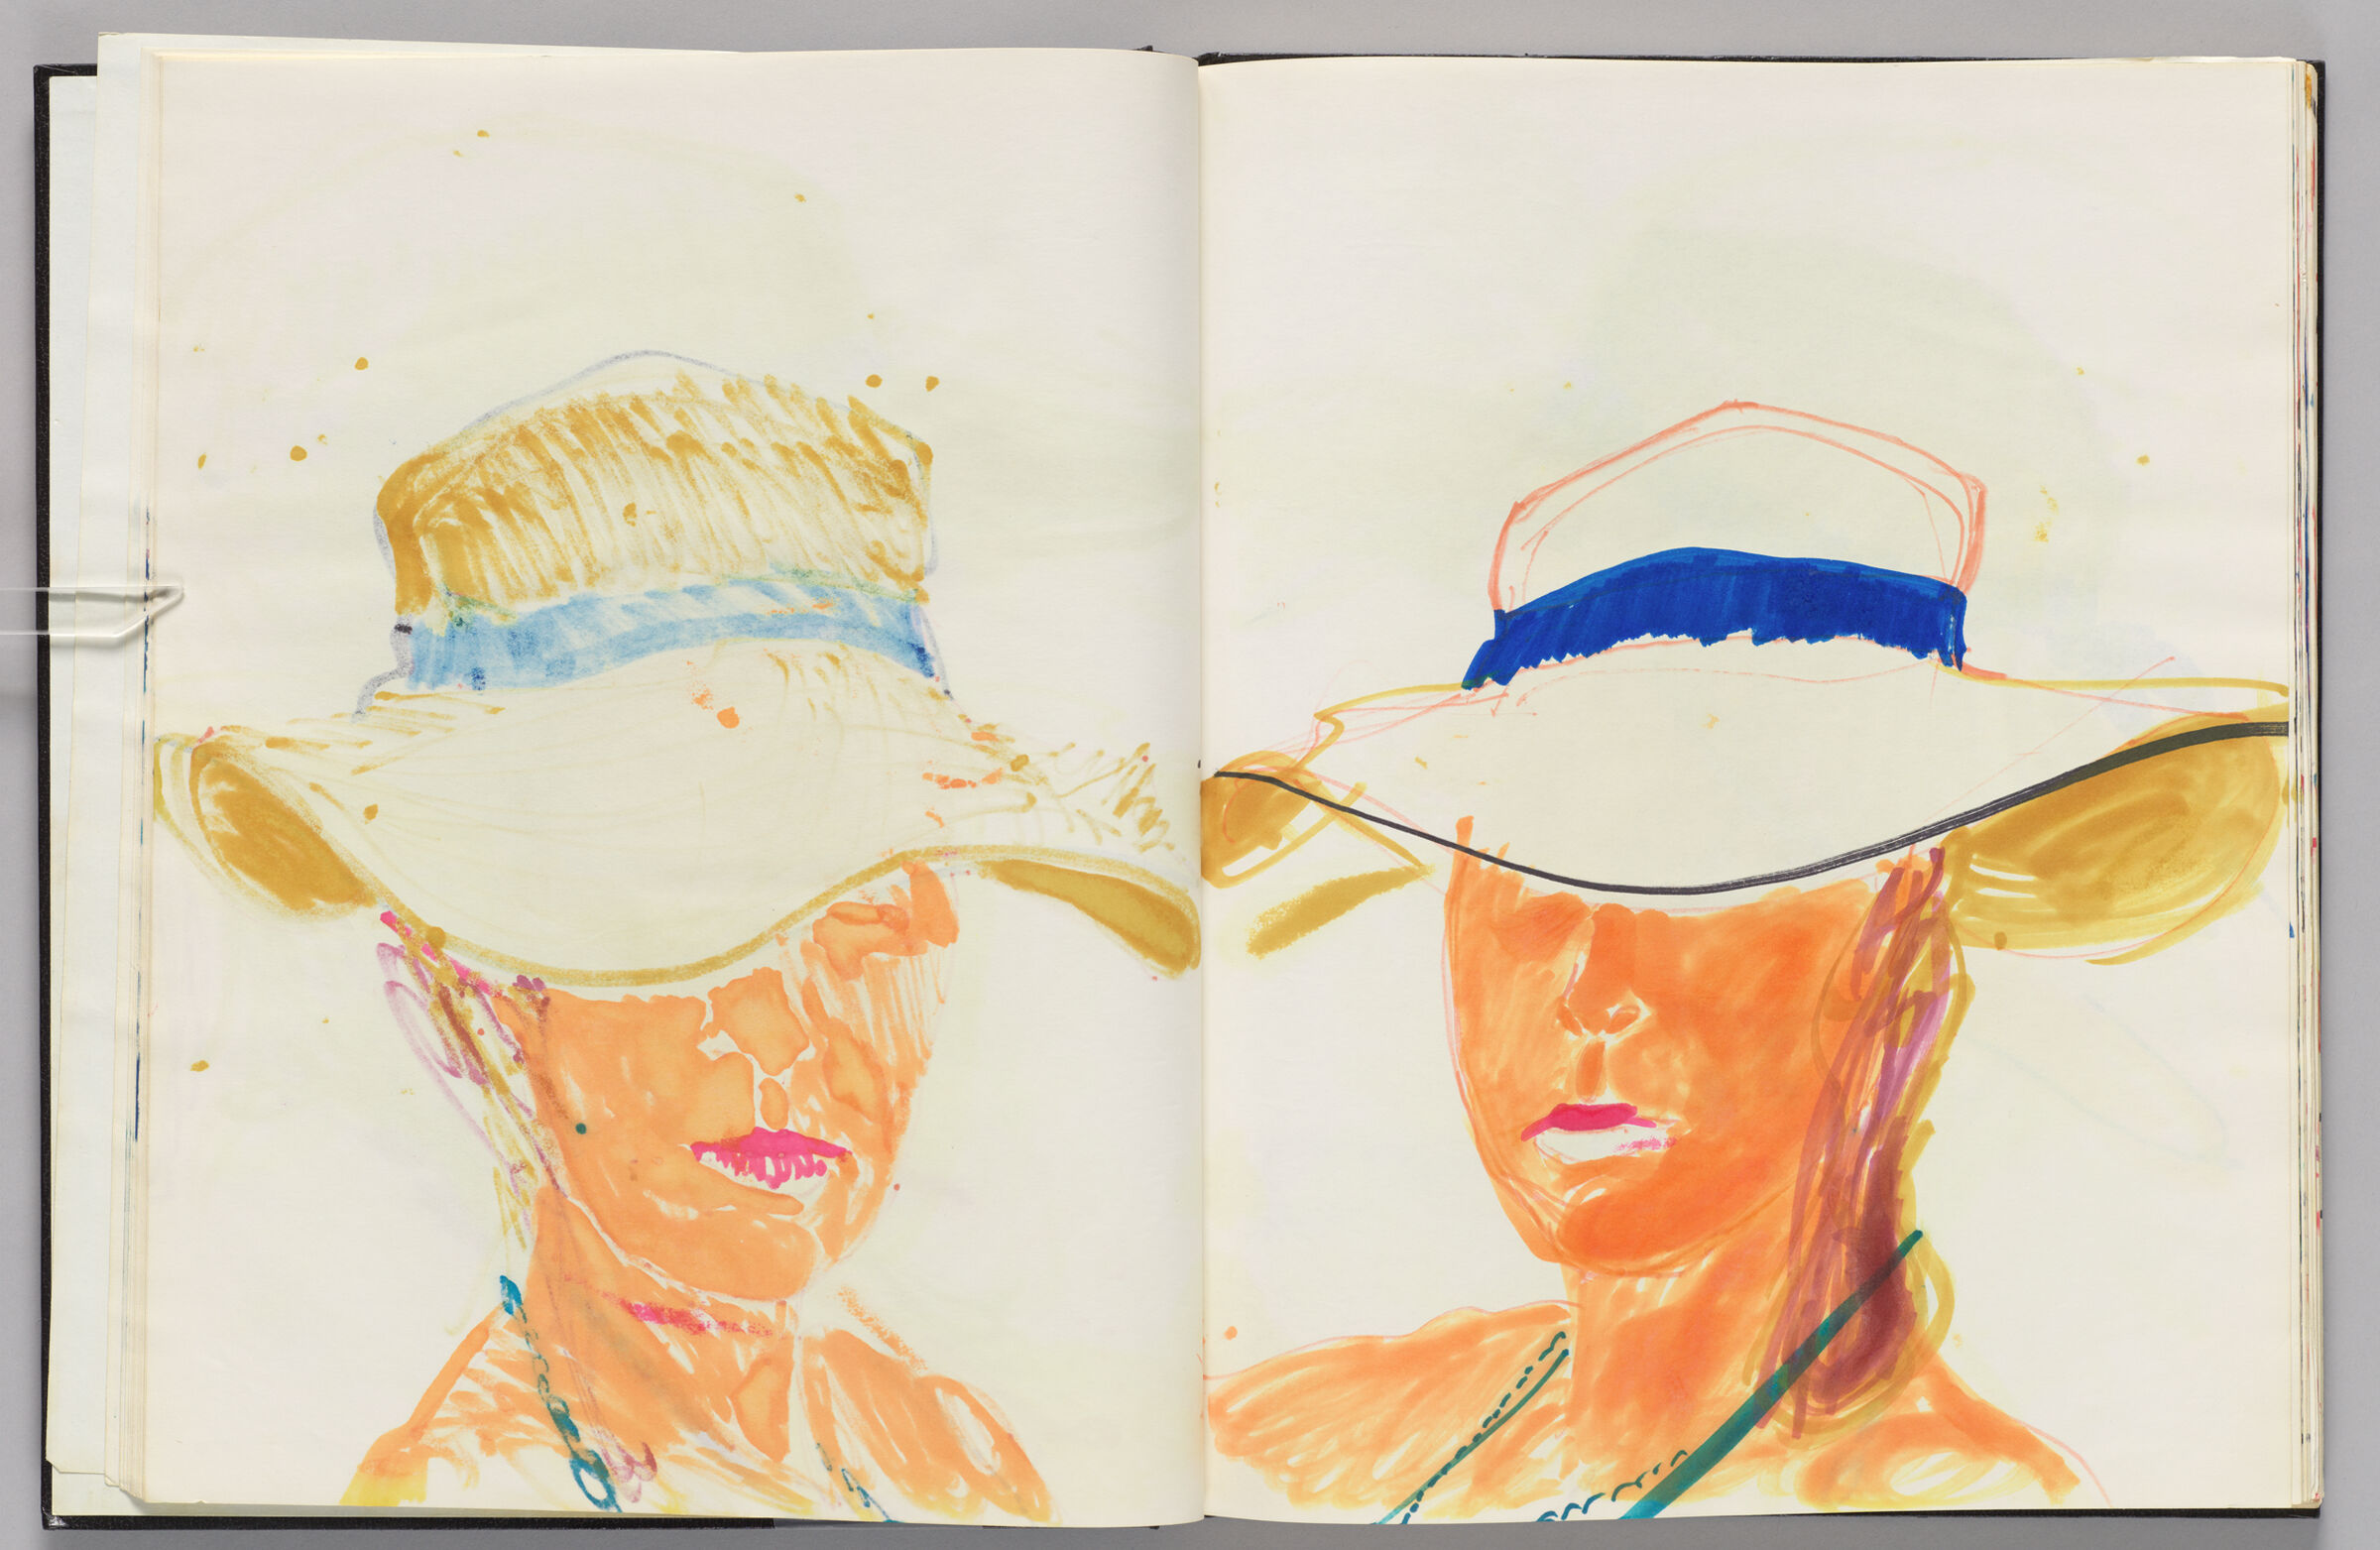 Untitled (Bleed-Through Of Previous Page, Left Page); Untitled (Frontal Portait Of Female Figure (Elizabeth Goldring), Right Page)